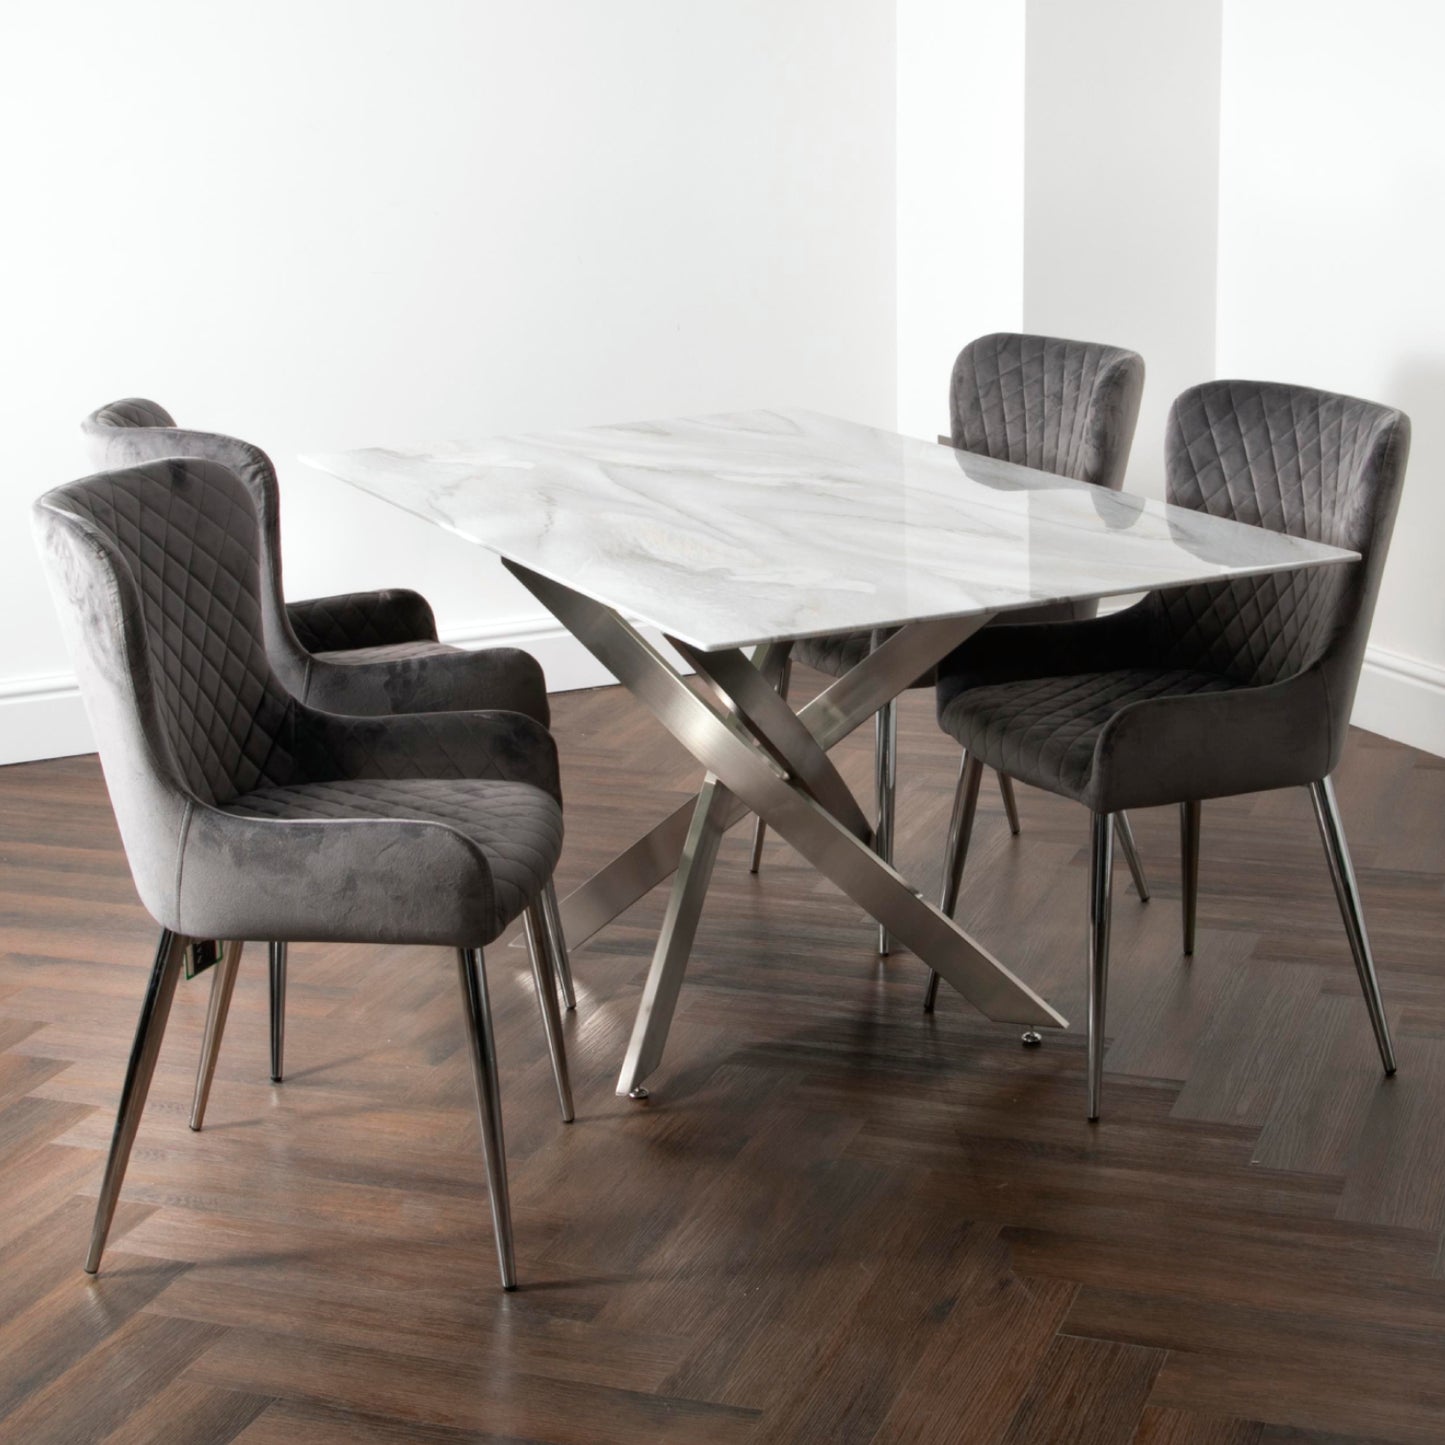 Marble glass rectangle dining table with 6 chairs by Native